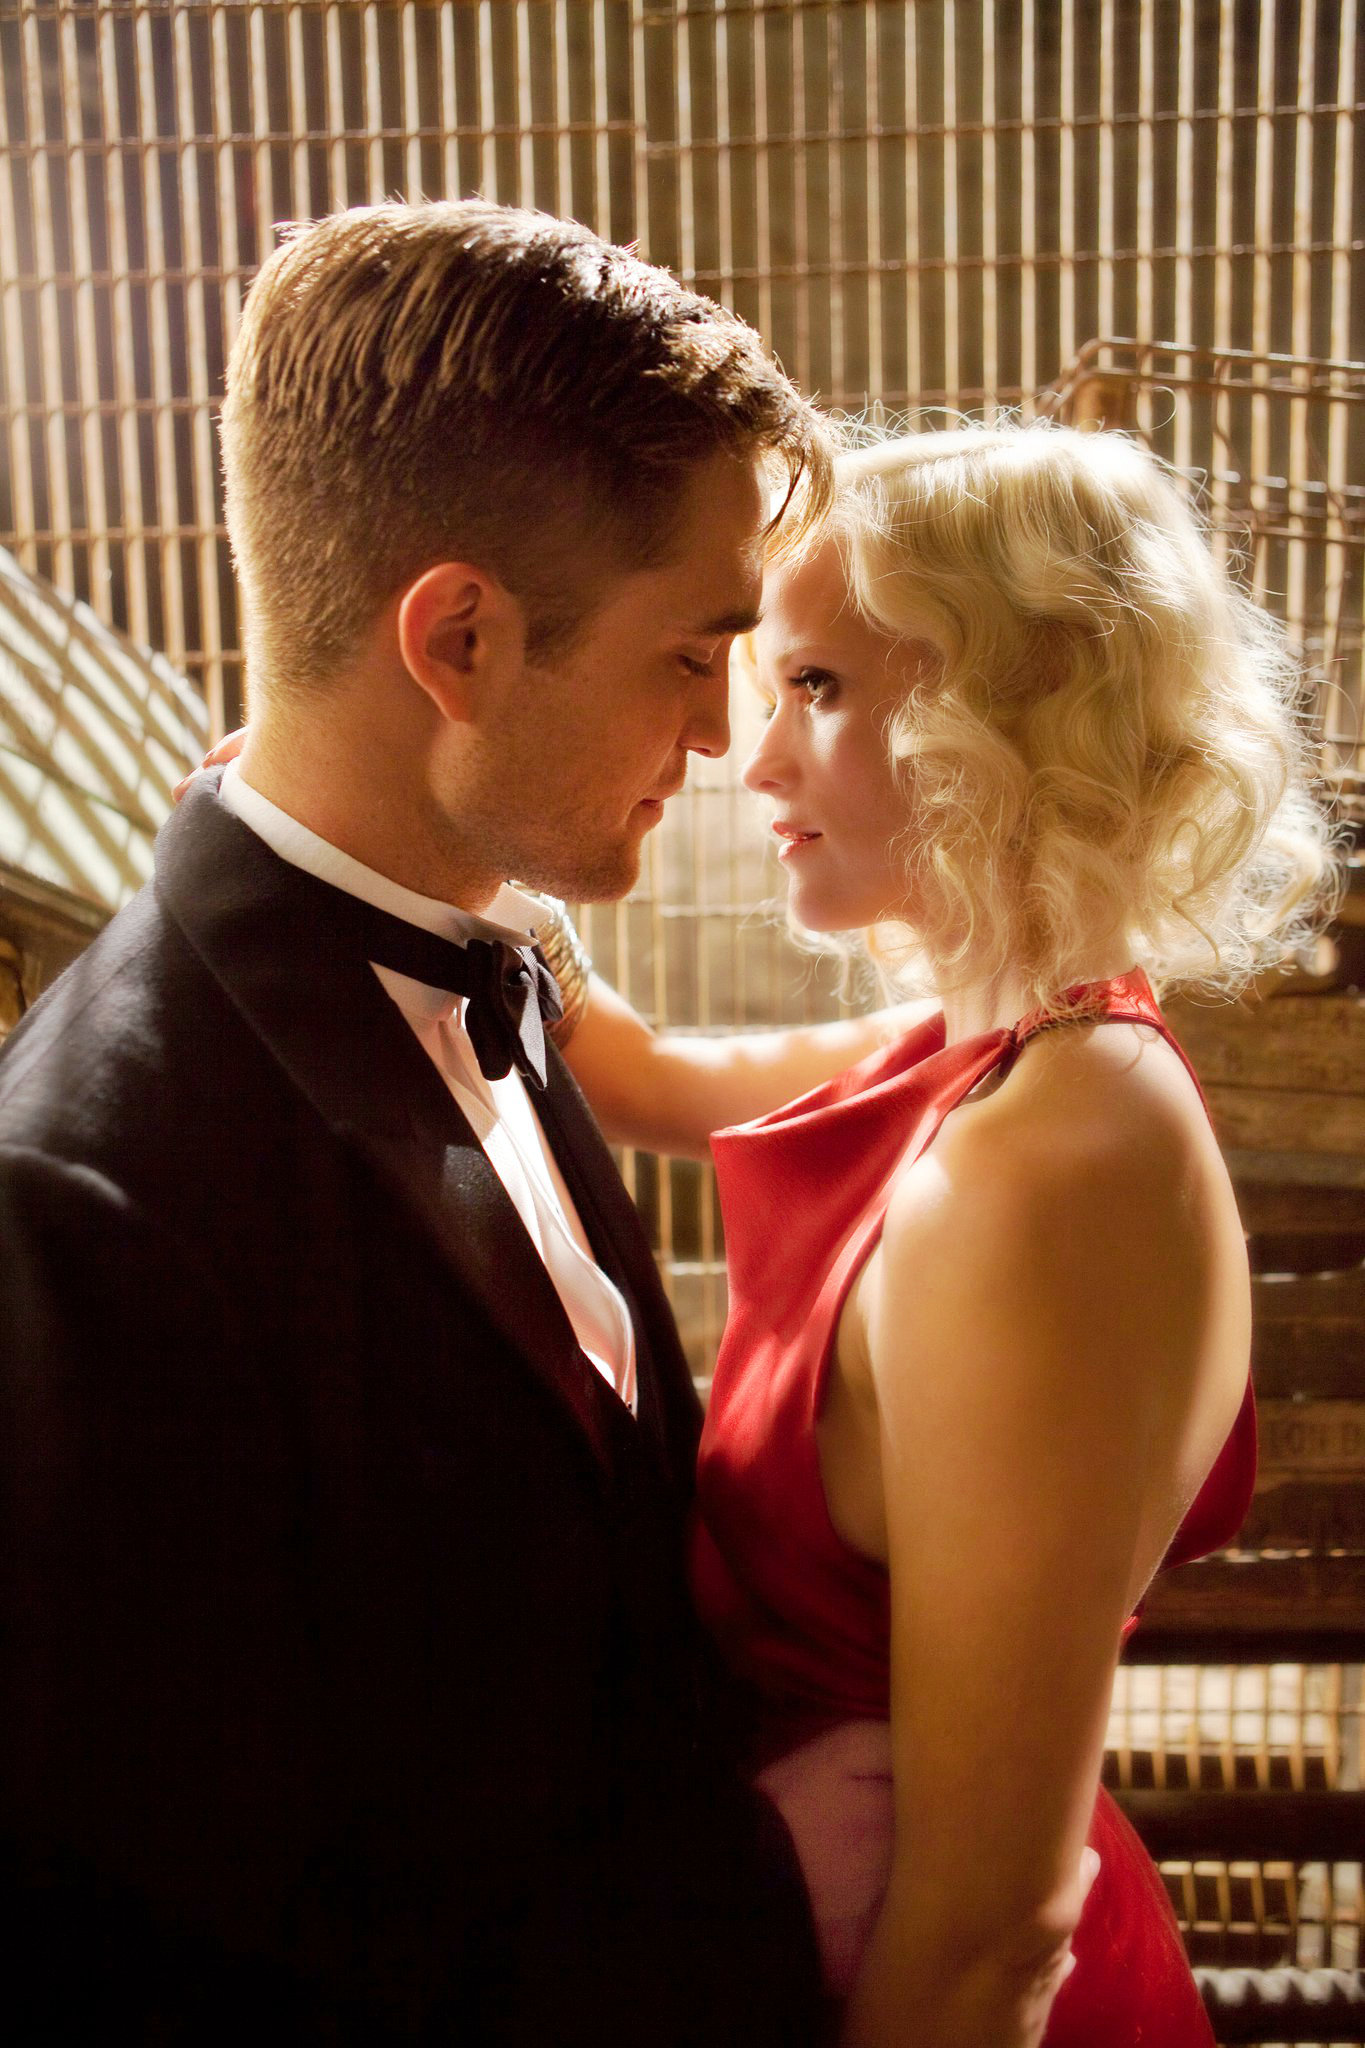 Robert Pattinson stars as Jacob Jankowski and Reese Witherspoon stars as Marlena Rosenbluth in 20th Century Fox's Water for Elephants (2011)